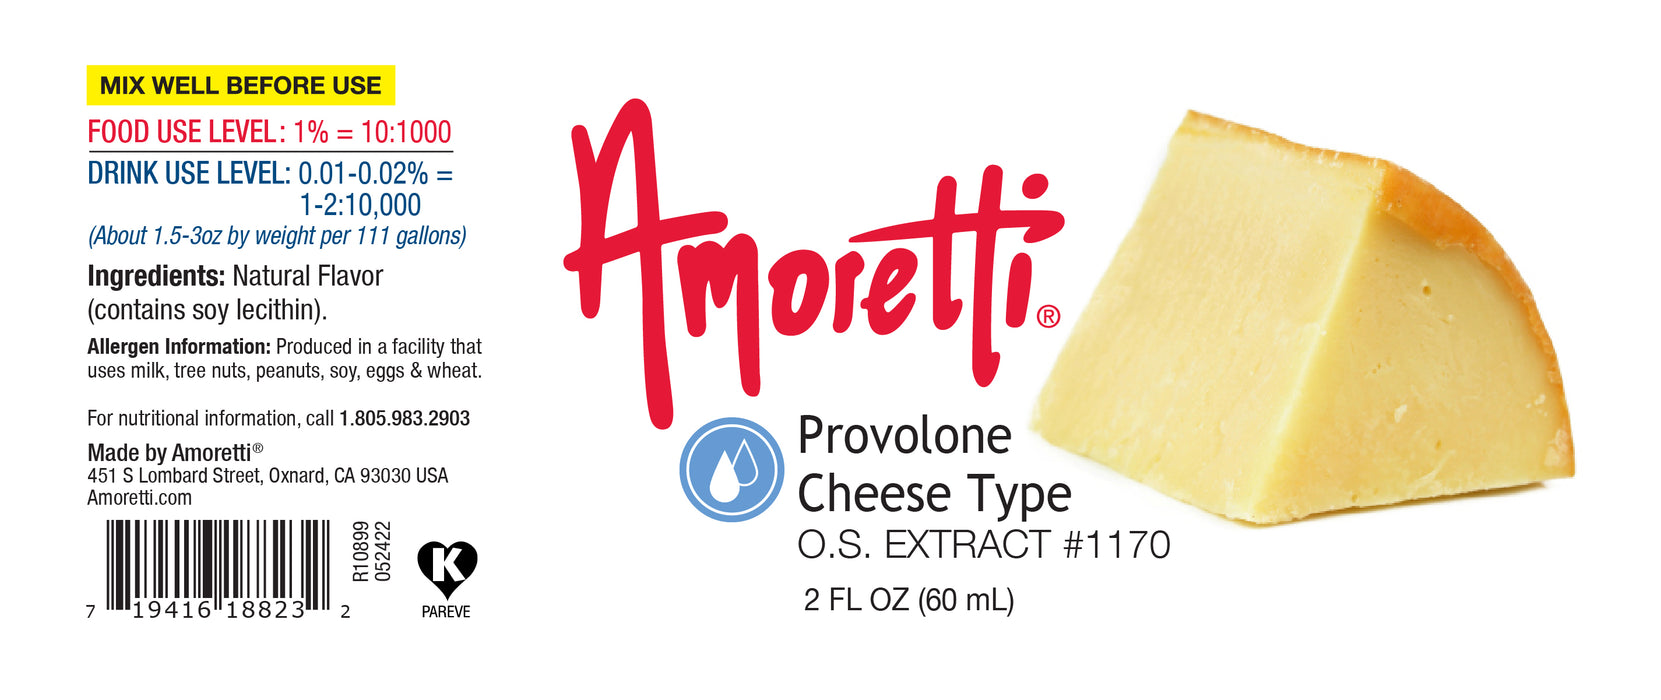 Provolone Cheese Type Extract Oil Soluble